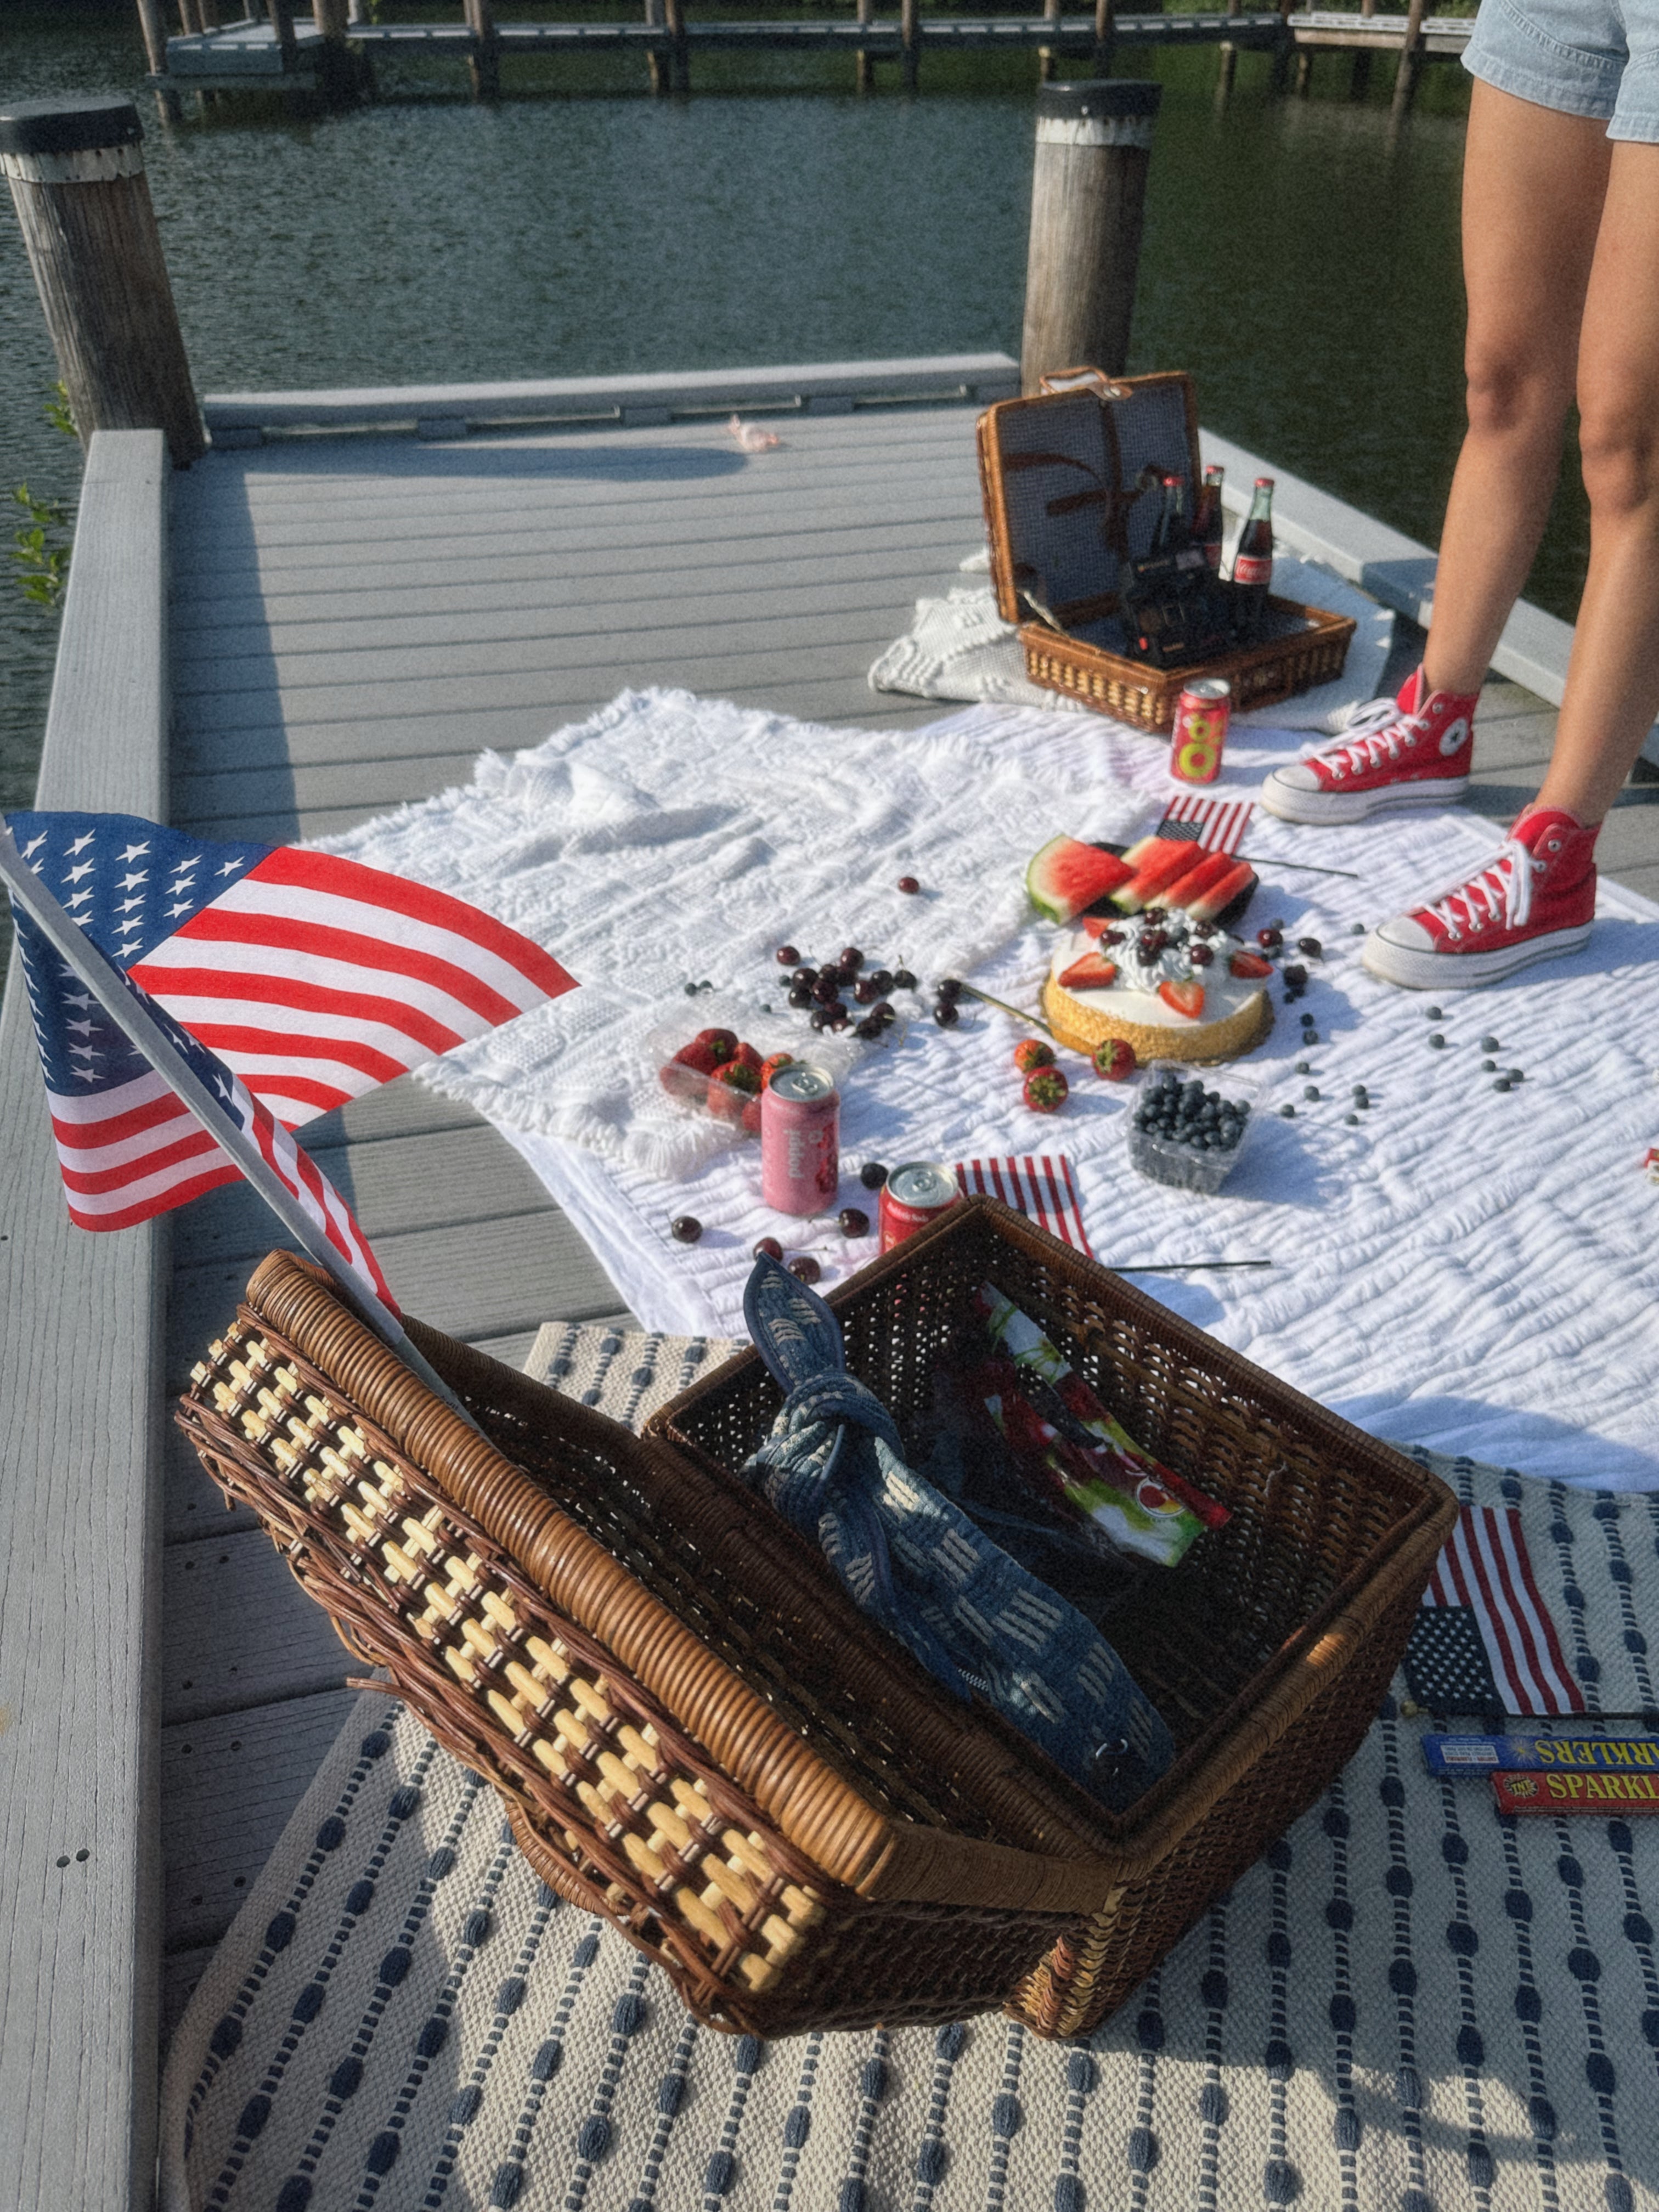 image of a 4th of july picnic with berries, cake & american flag in the background by a picnic basket